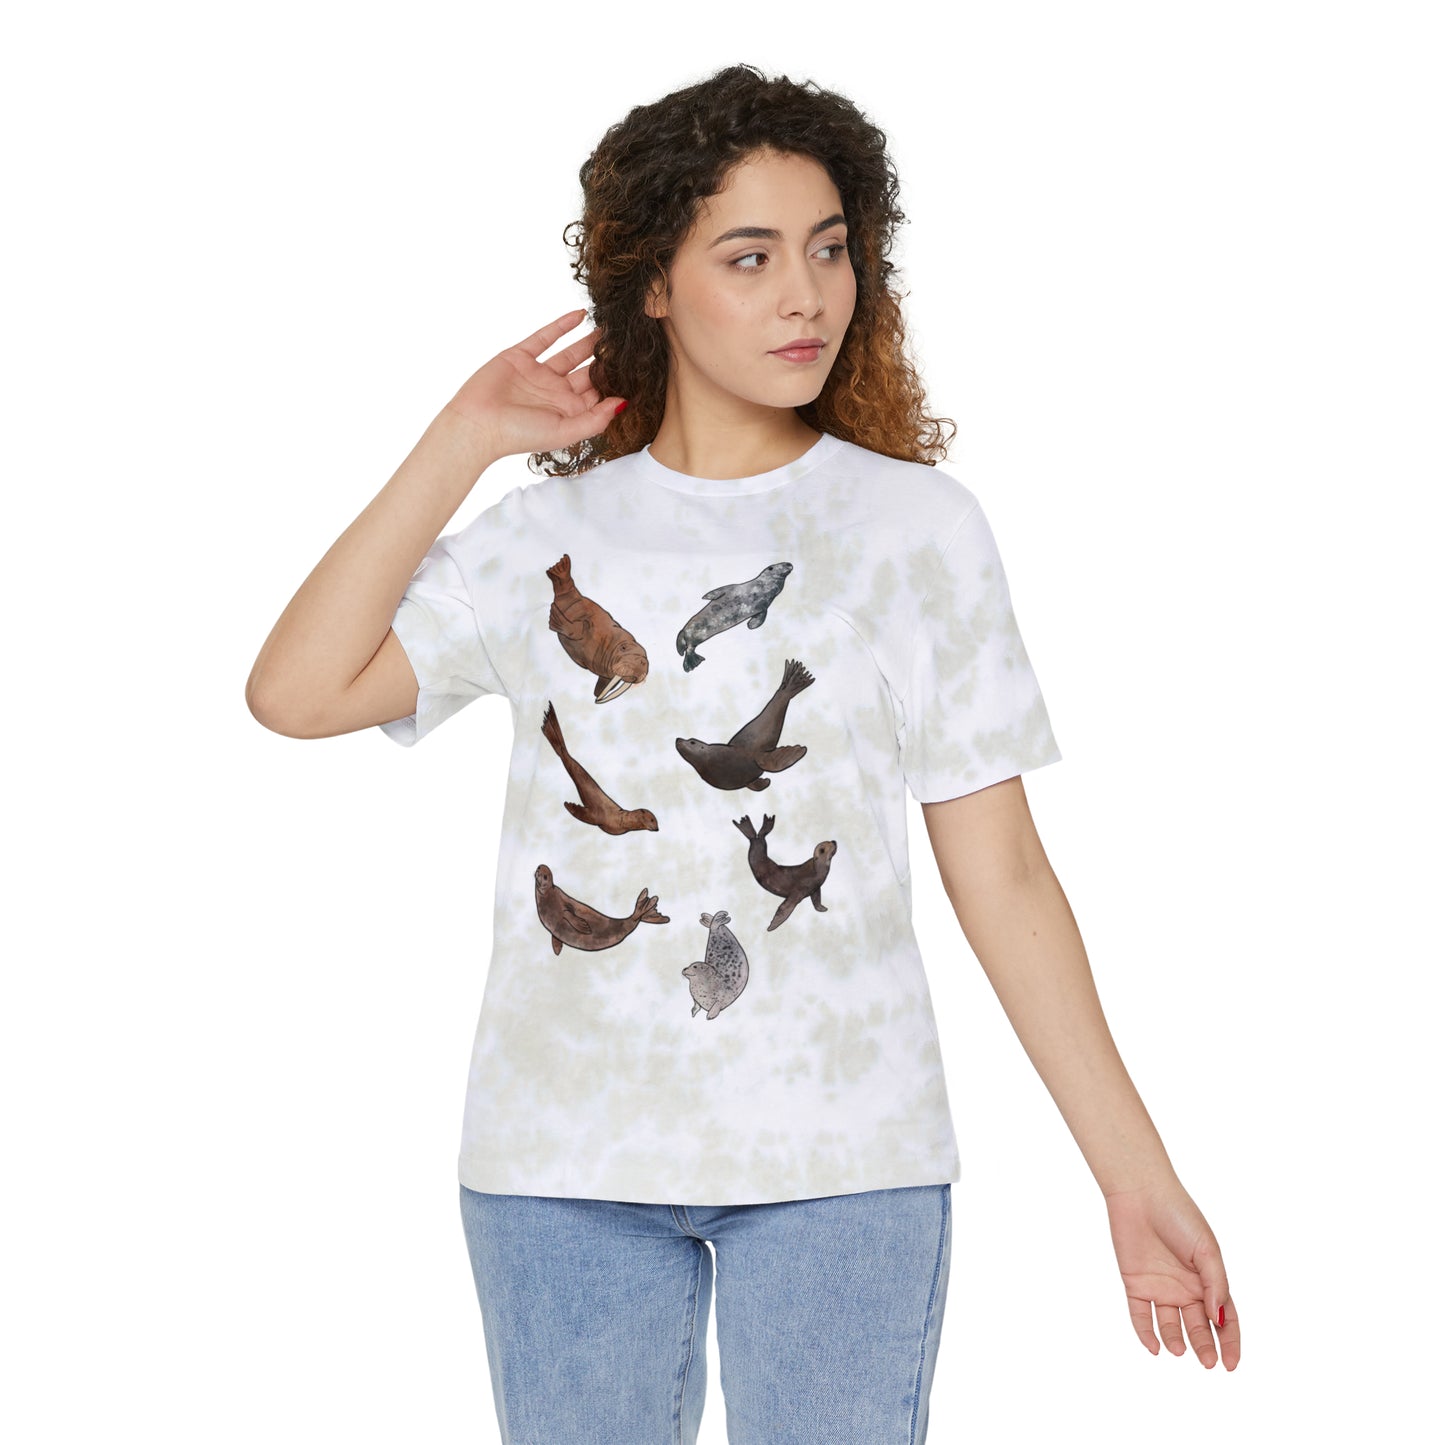 Pinniped Tie-Dyed T-Shirt